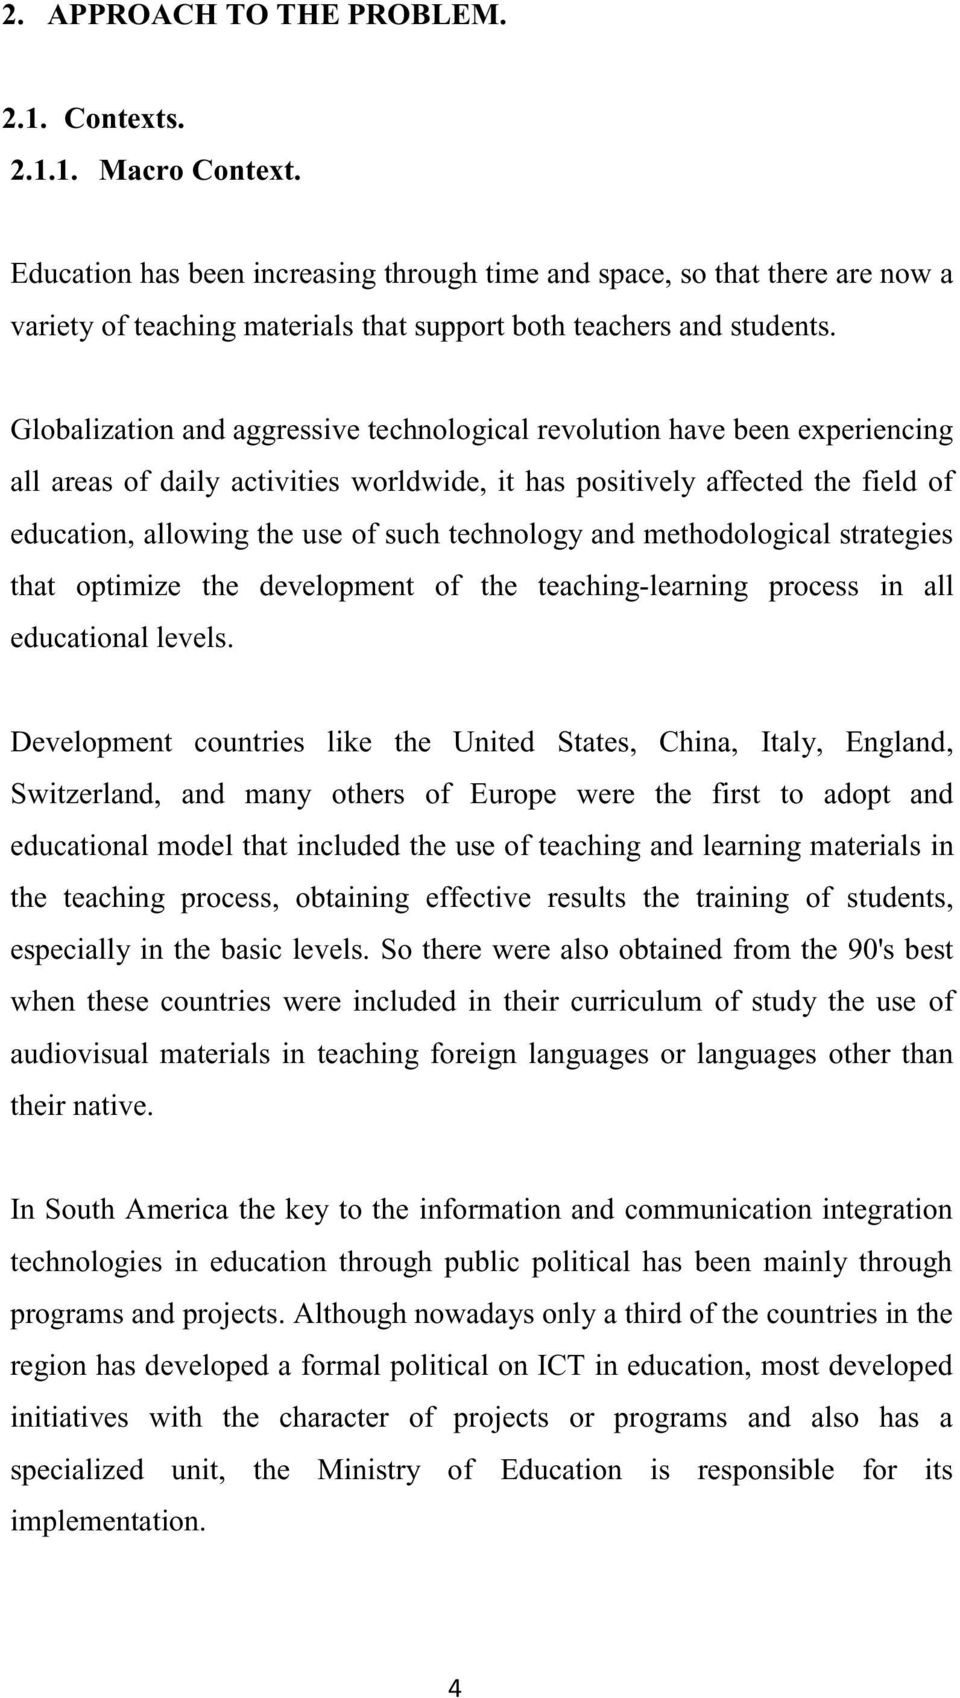 Globalization and aggressive technological revolution have been experiencing all areas of daily activities worldwide, it has positively affected the field of education, allowing the use of such